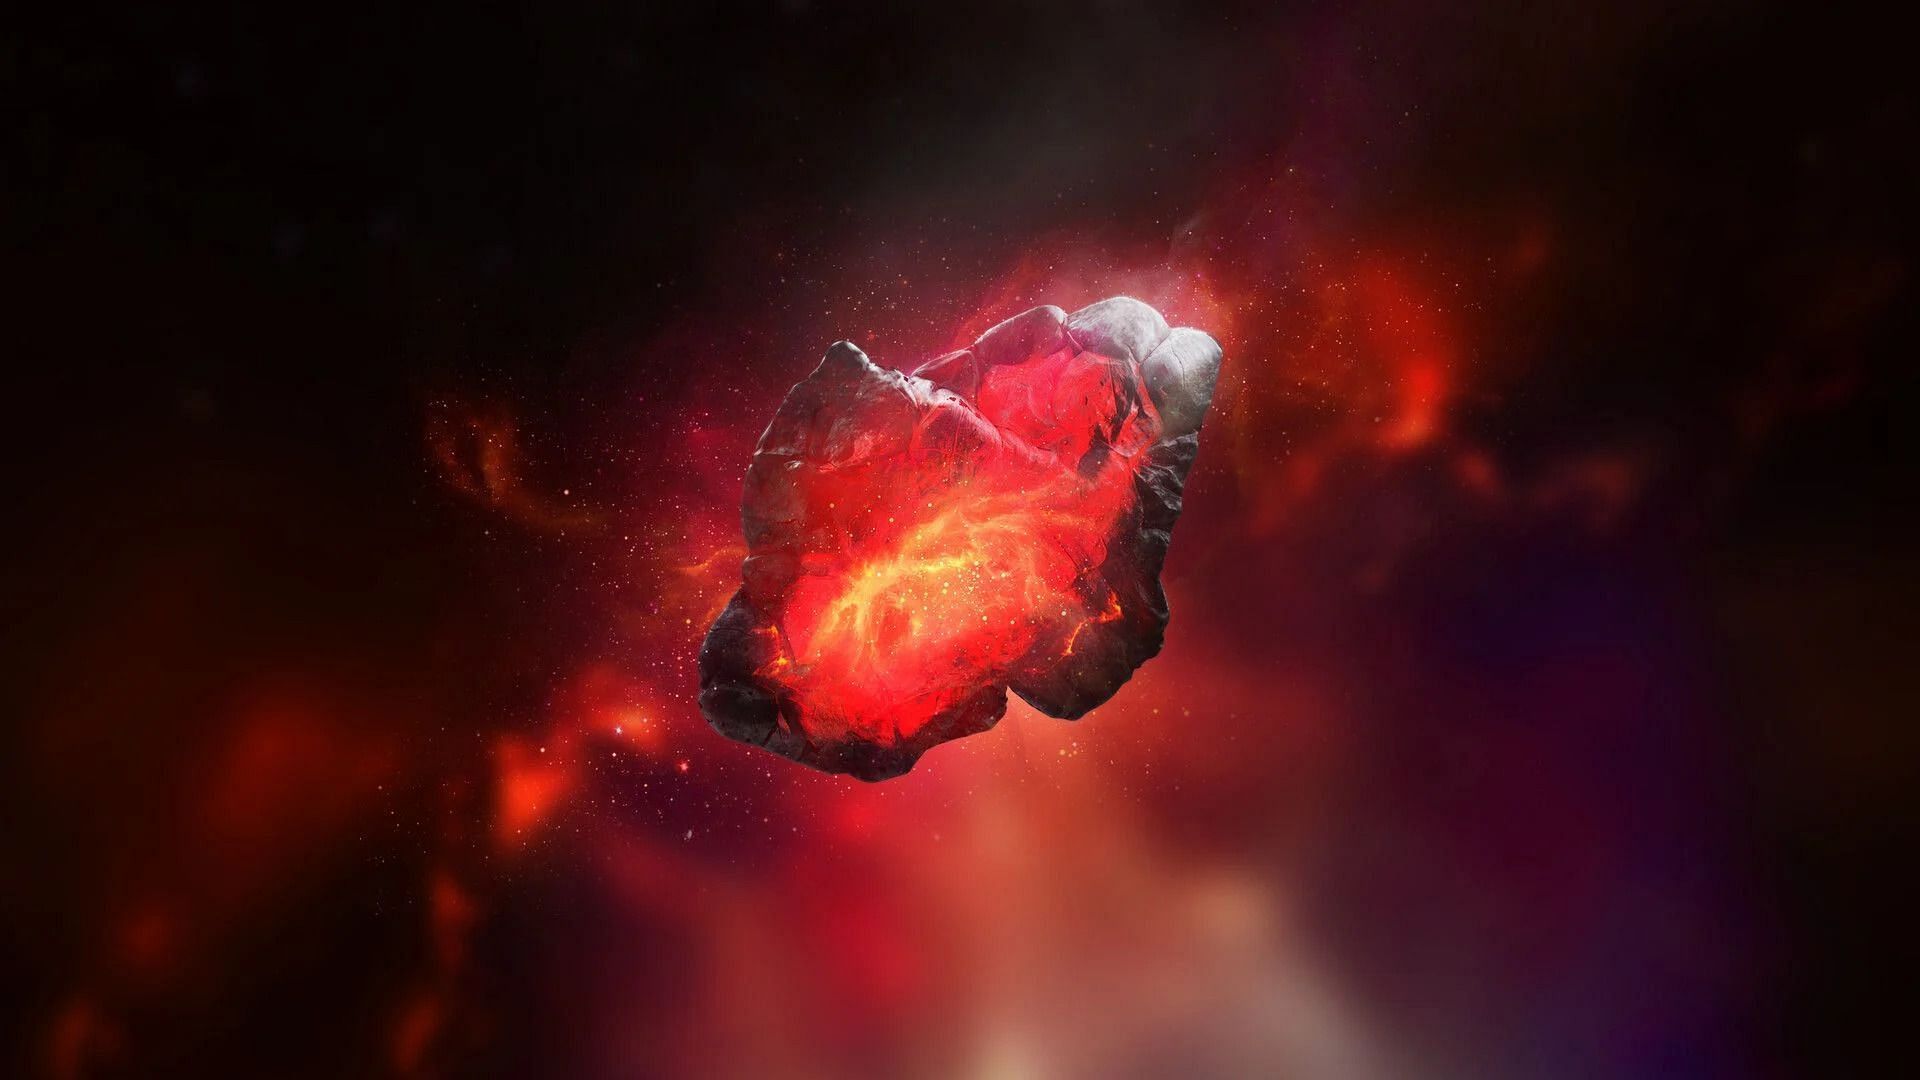 Reality stone, first seen in Thor: The Dark World (image via Marvel)